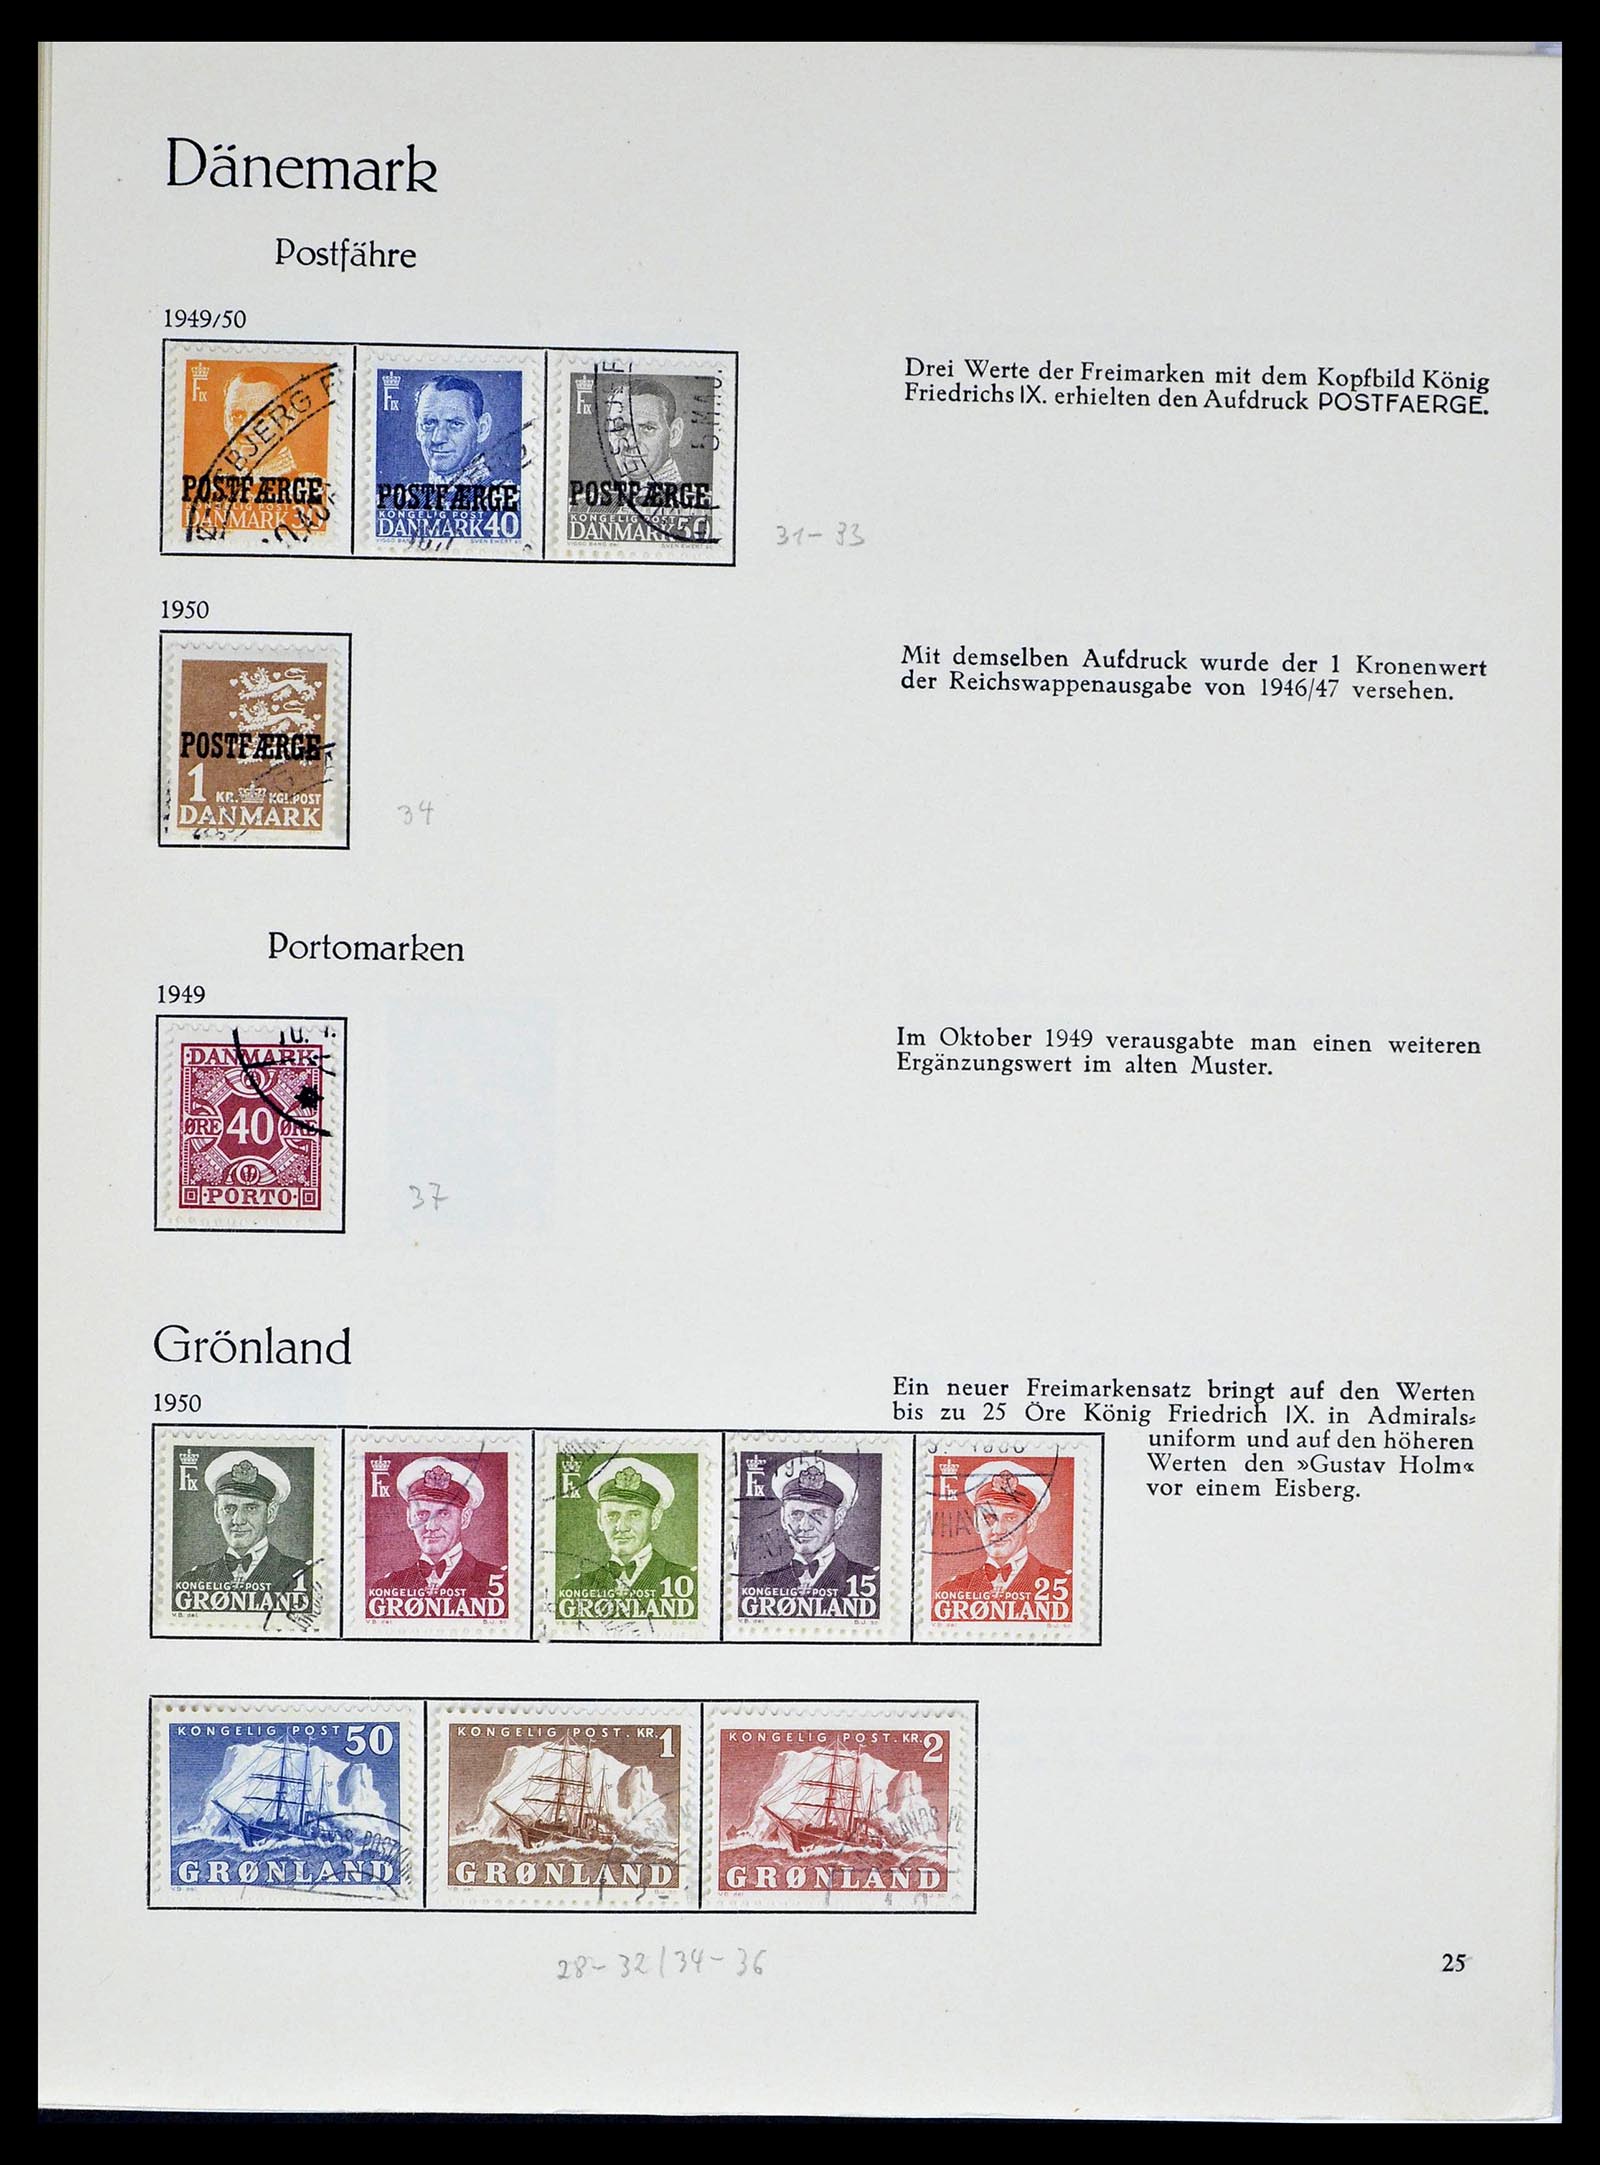 39407 0019 - Stamp collection 39407 Denmark 1851-1969.